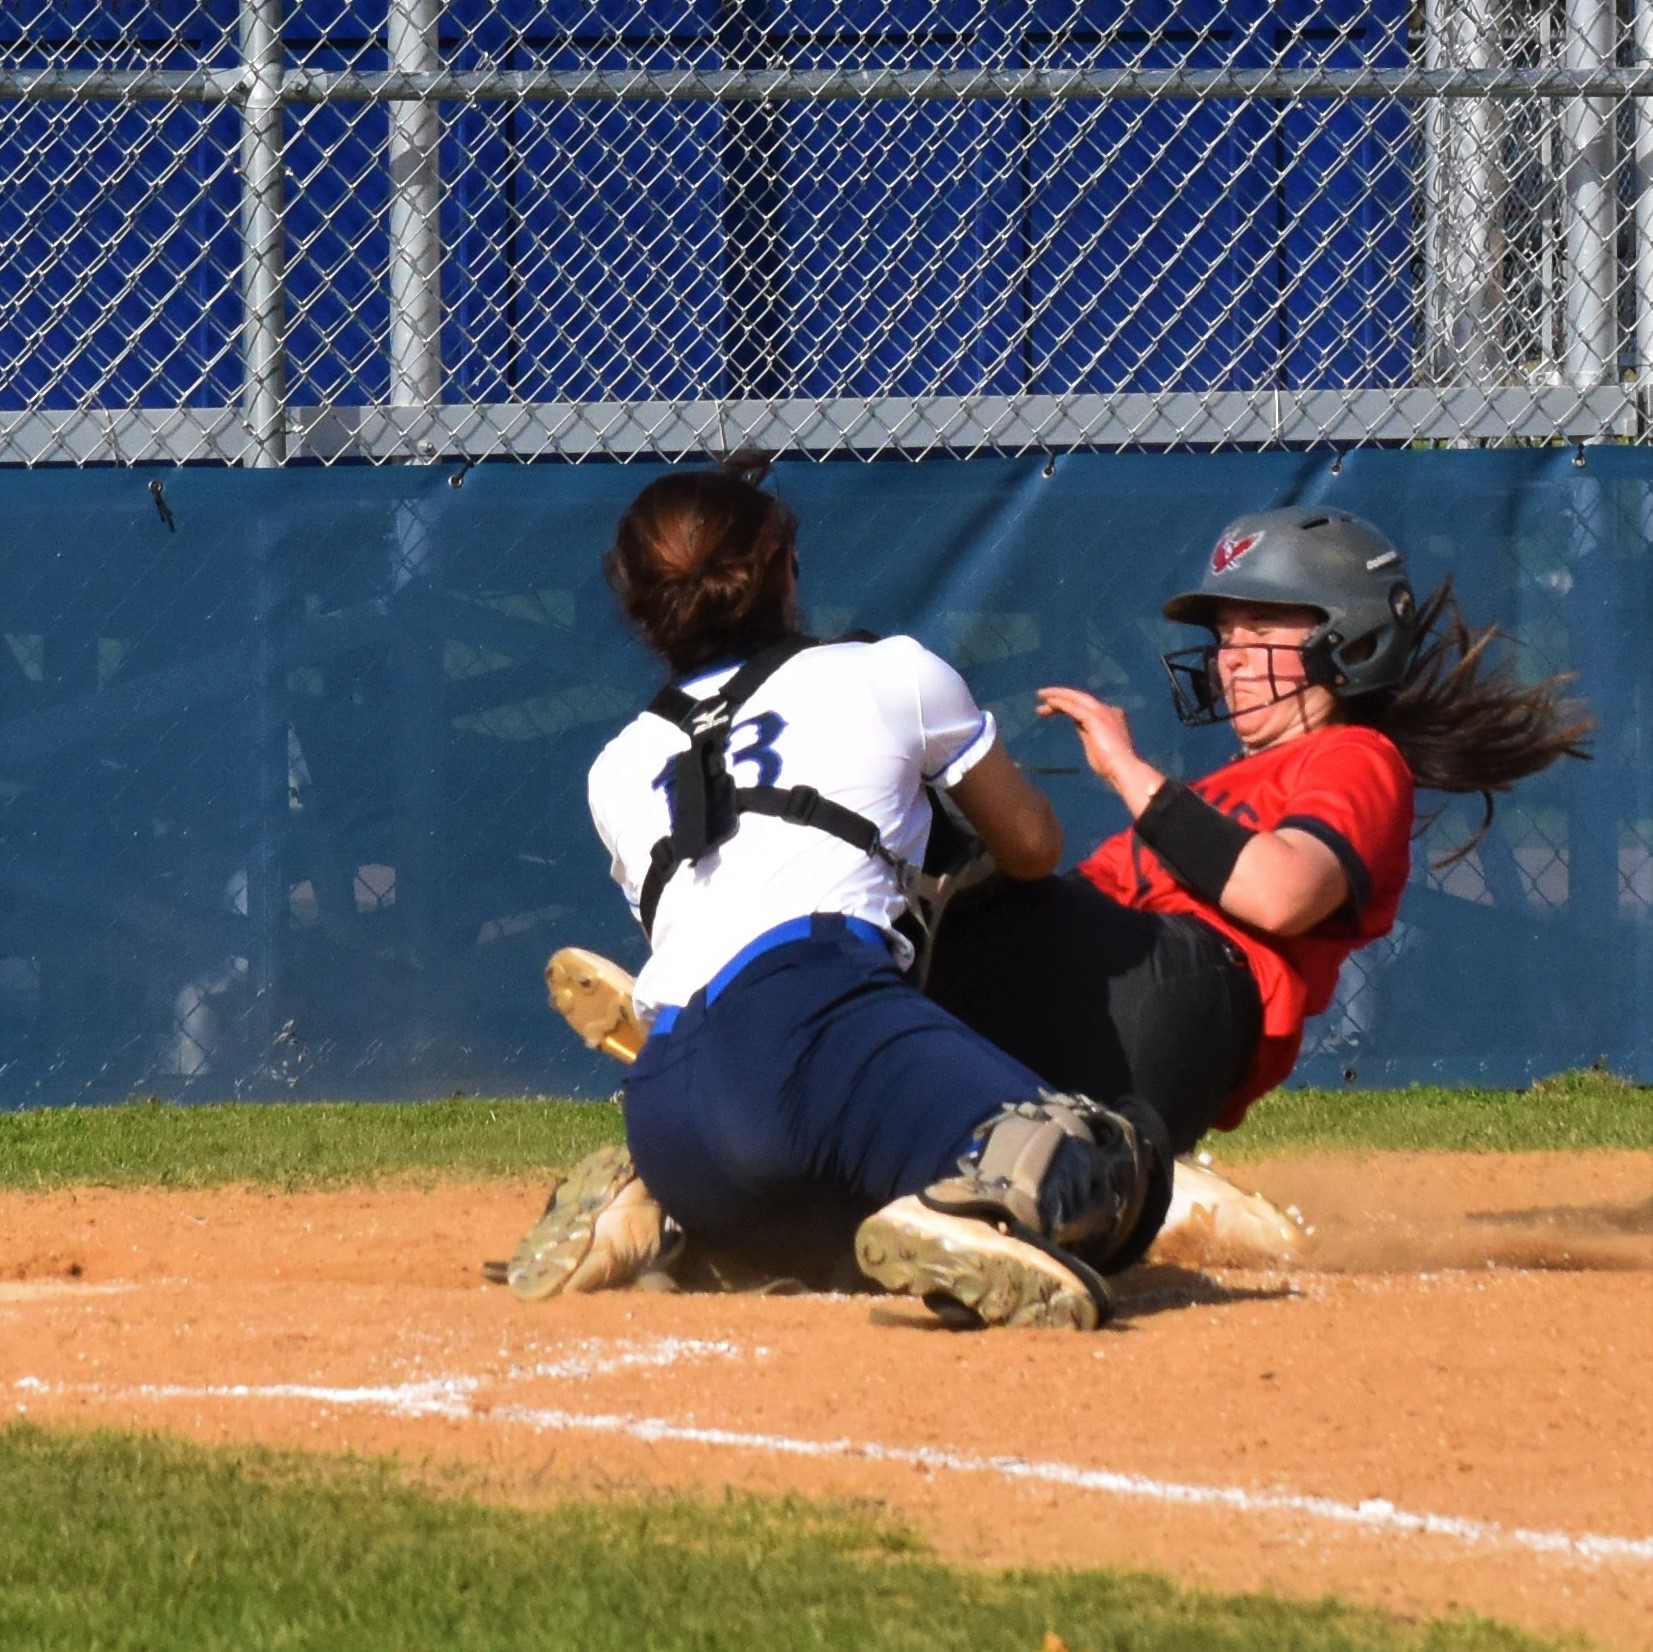 Christina Ciampa tags out Keene's Faith Barbieri in the seventh inning to extend the game. (Nate Moskowitz photo)